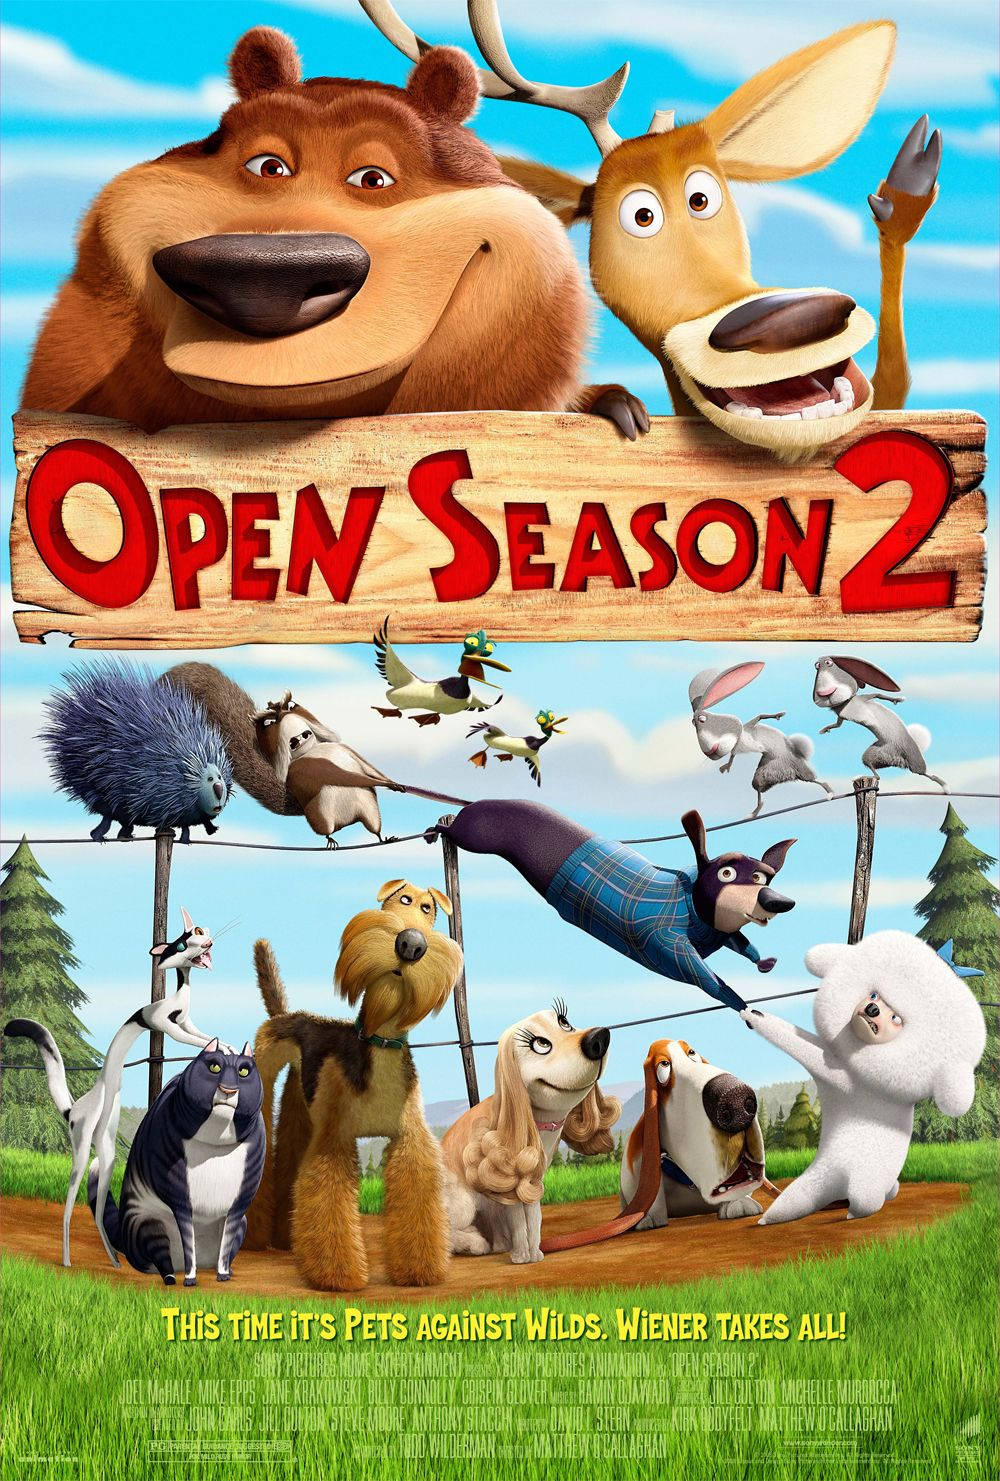 Open Season 2 Poster With Characters Wallpaper